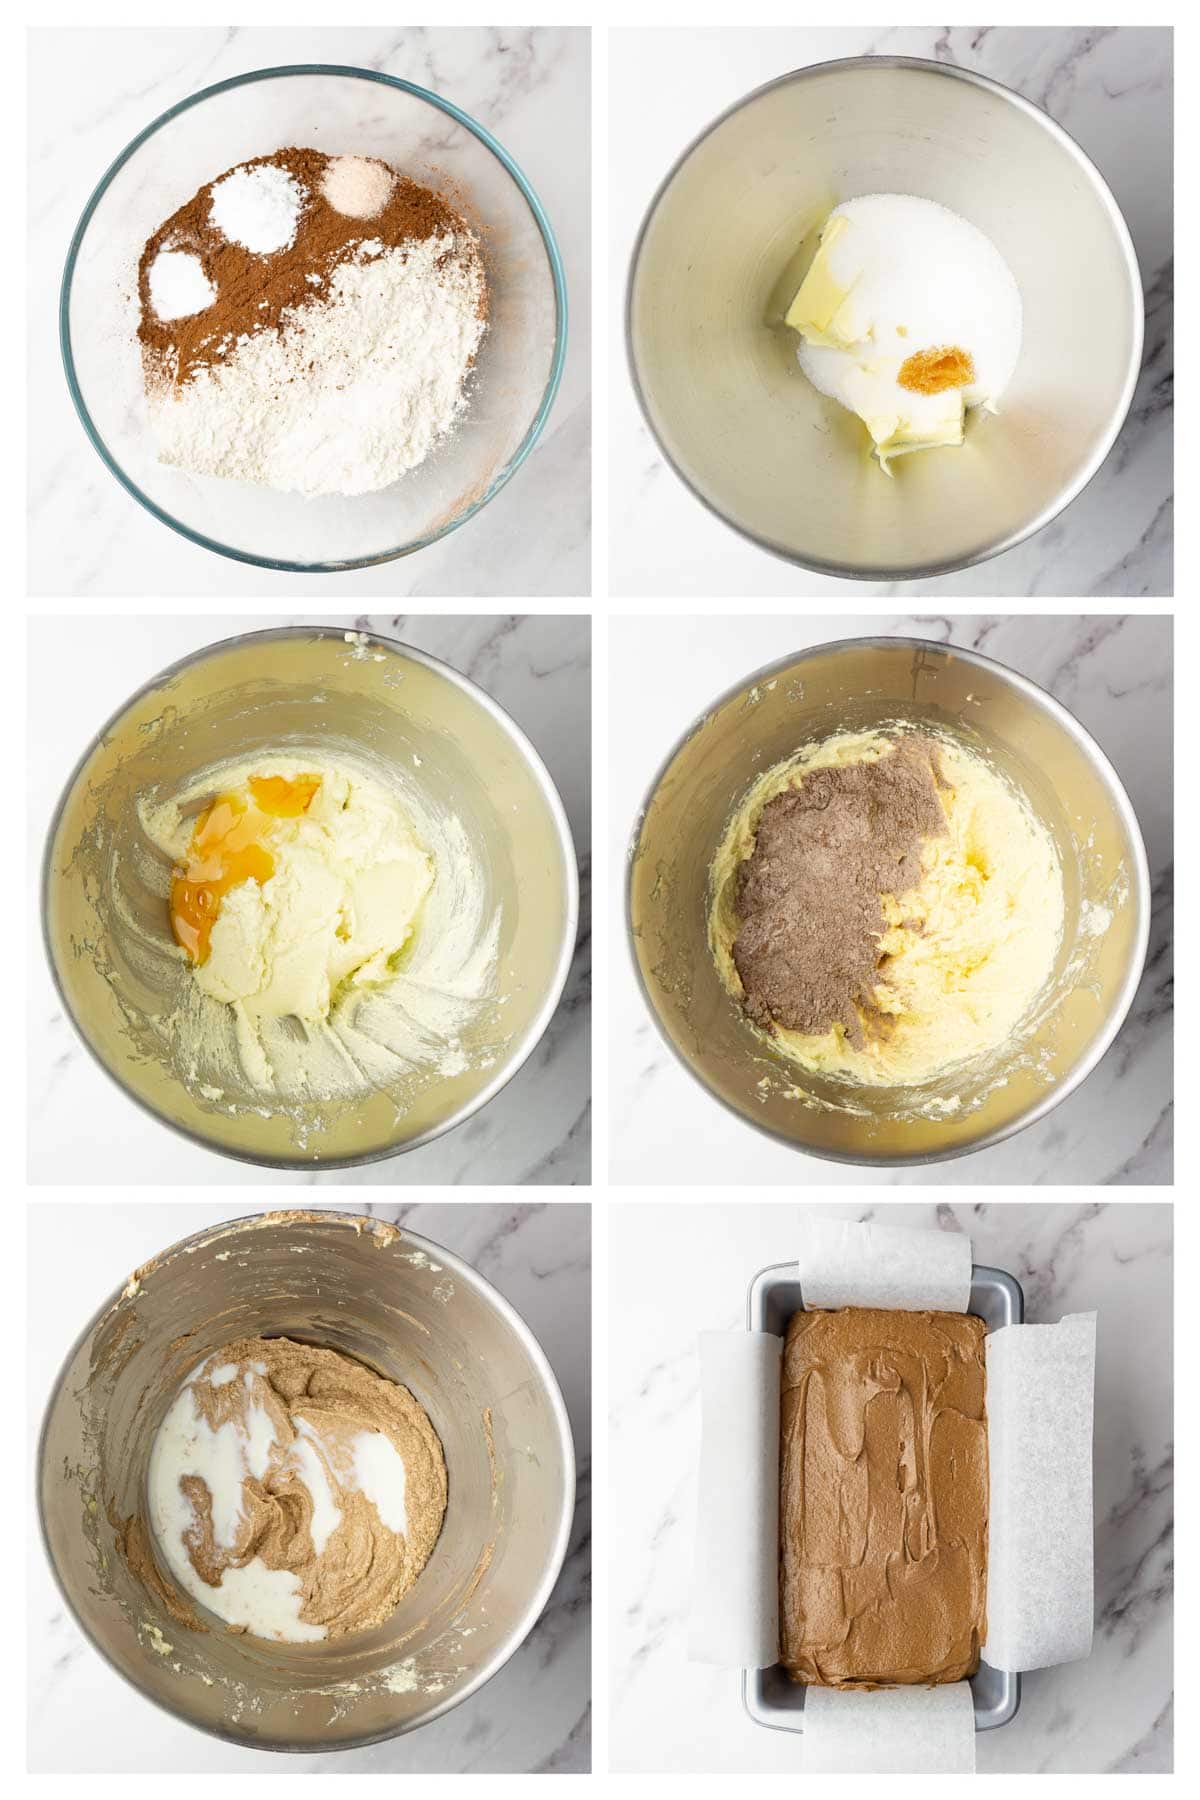 Collage image showing step by step instructions to make chocolate pound cake.